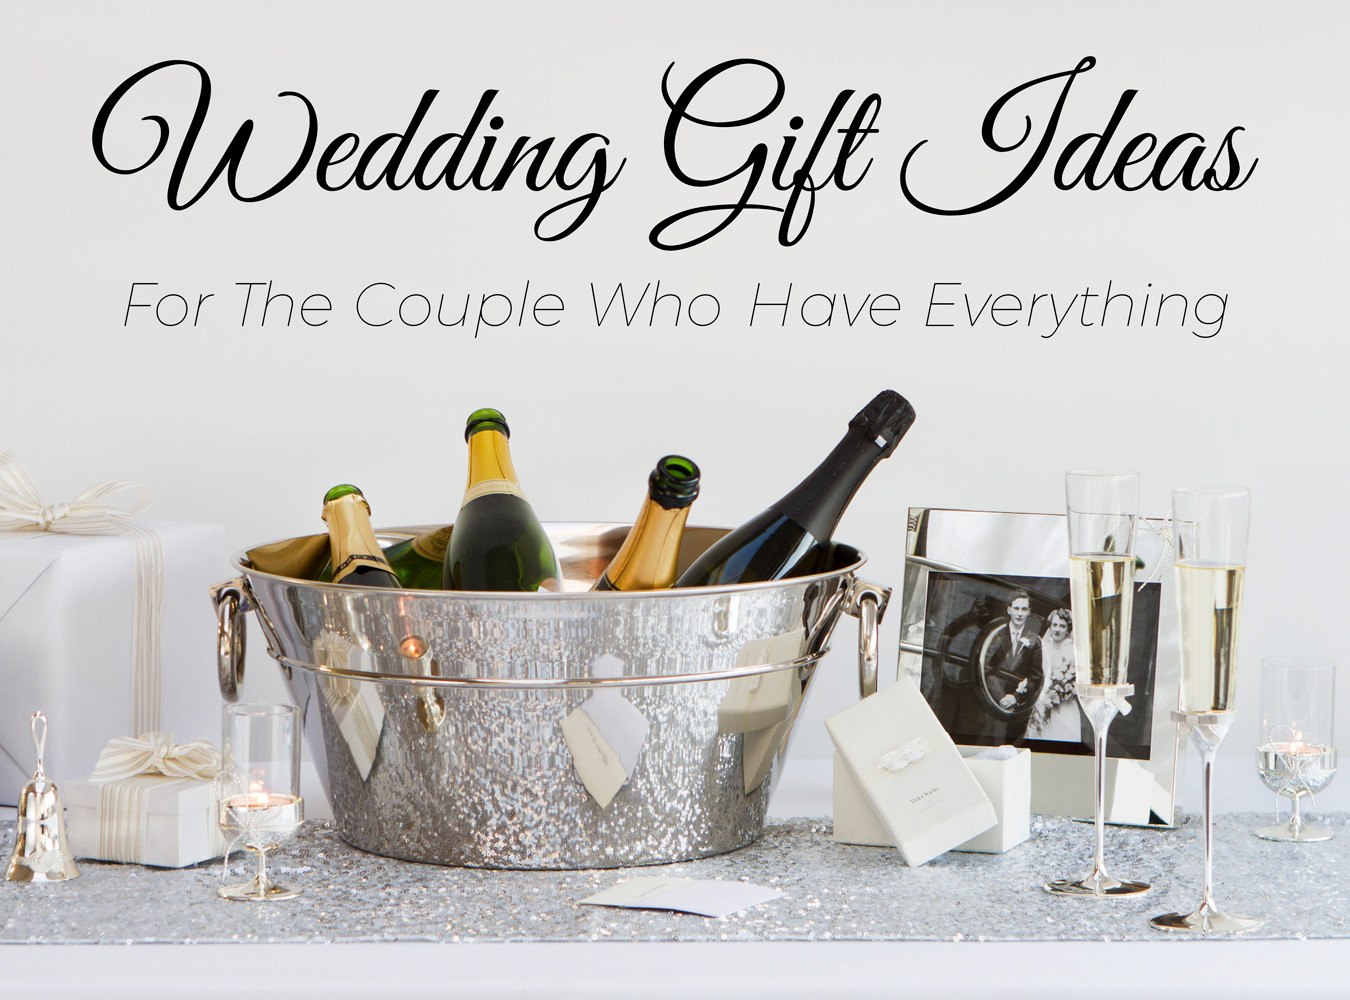 Wedding Gift Ideas For Young Couples
 5 Wedding Gift Ideas for the Couple Who Have Everything